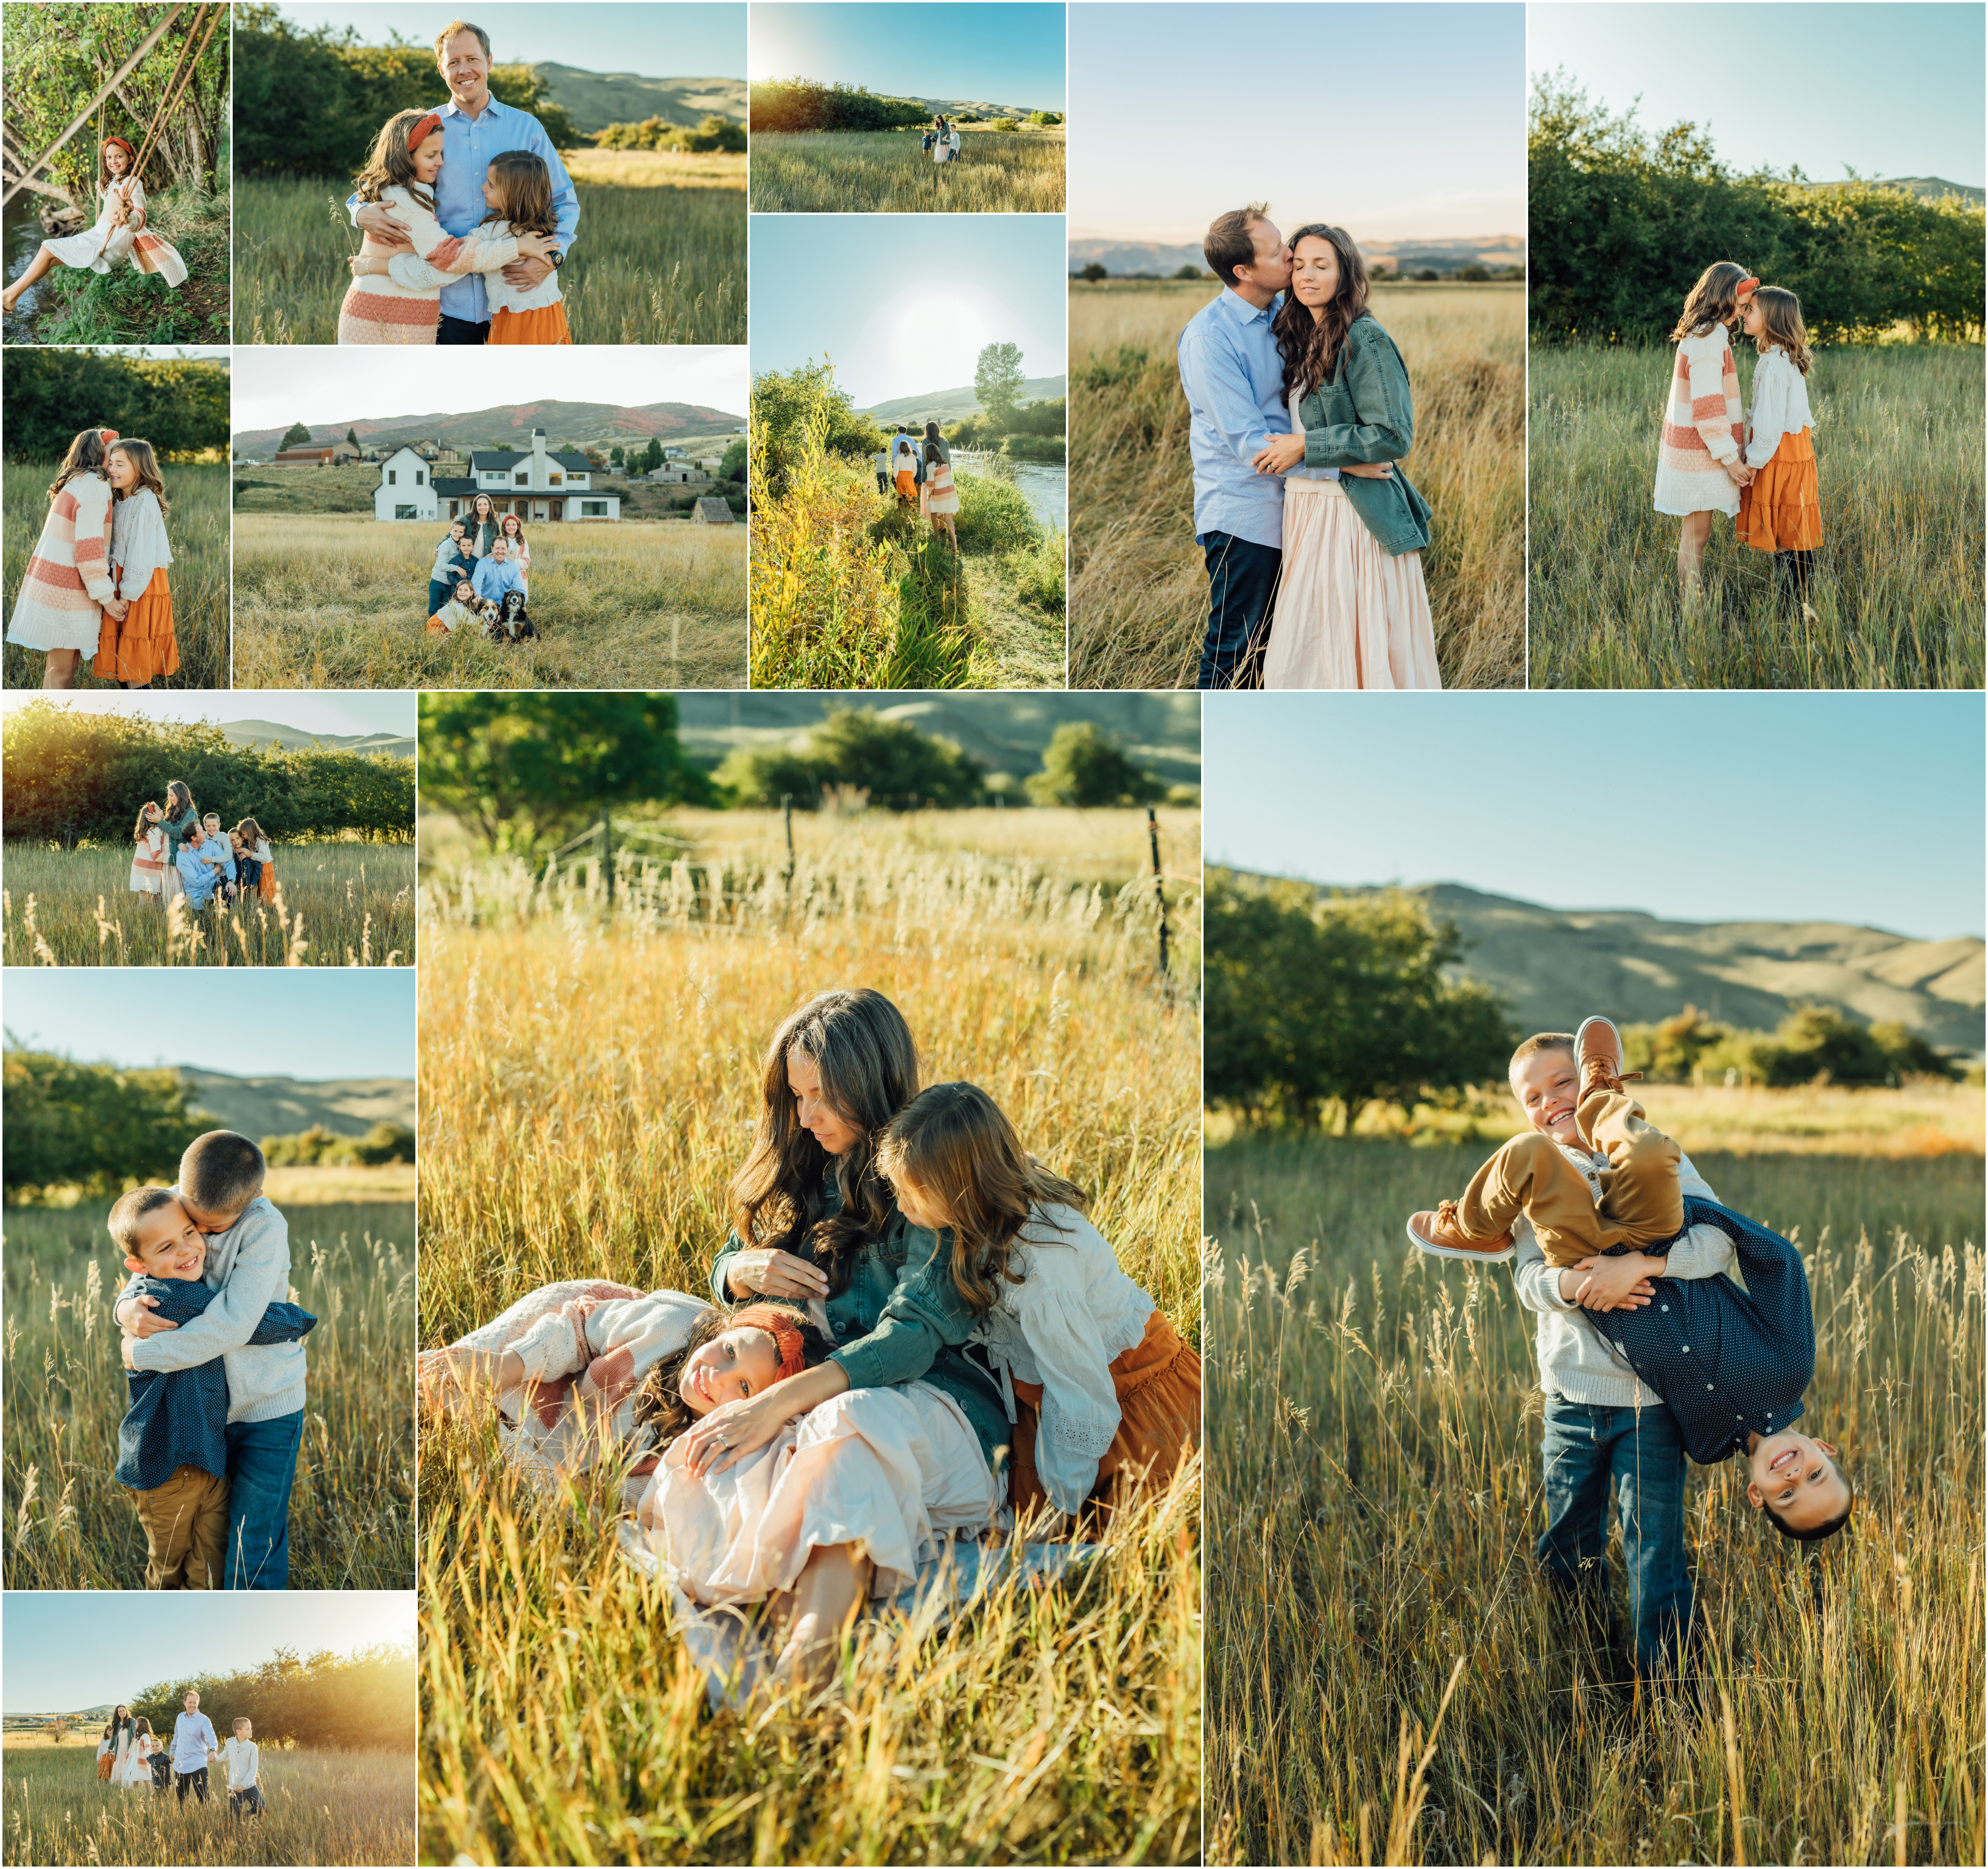 Utah County Family Photographer - Family Picture Tips